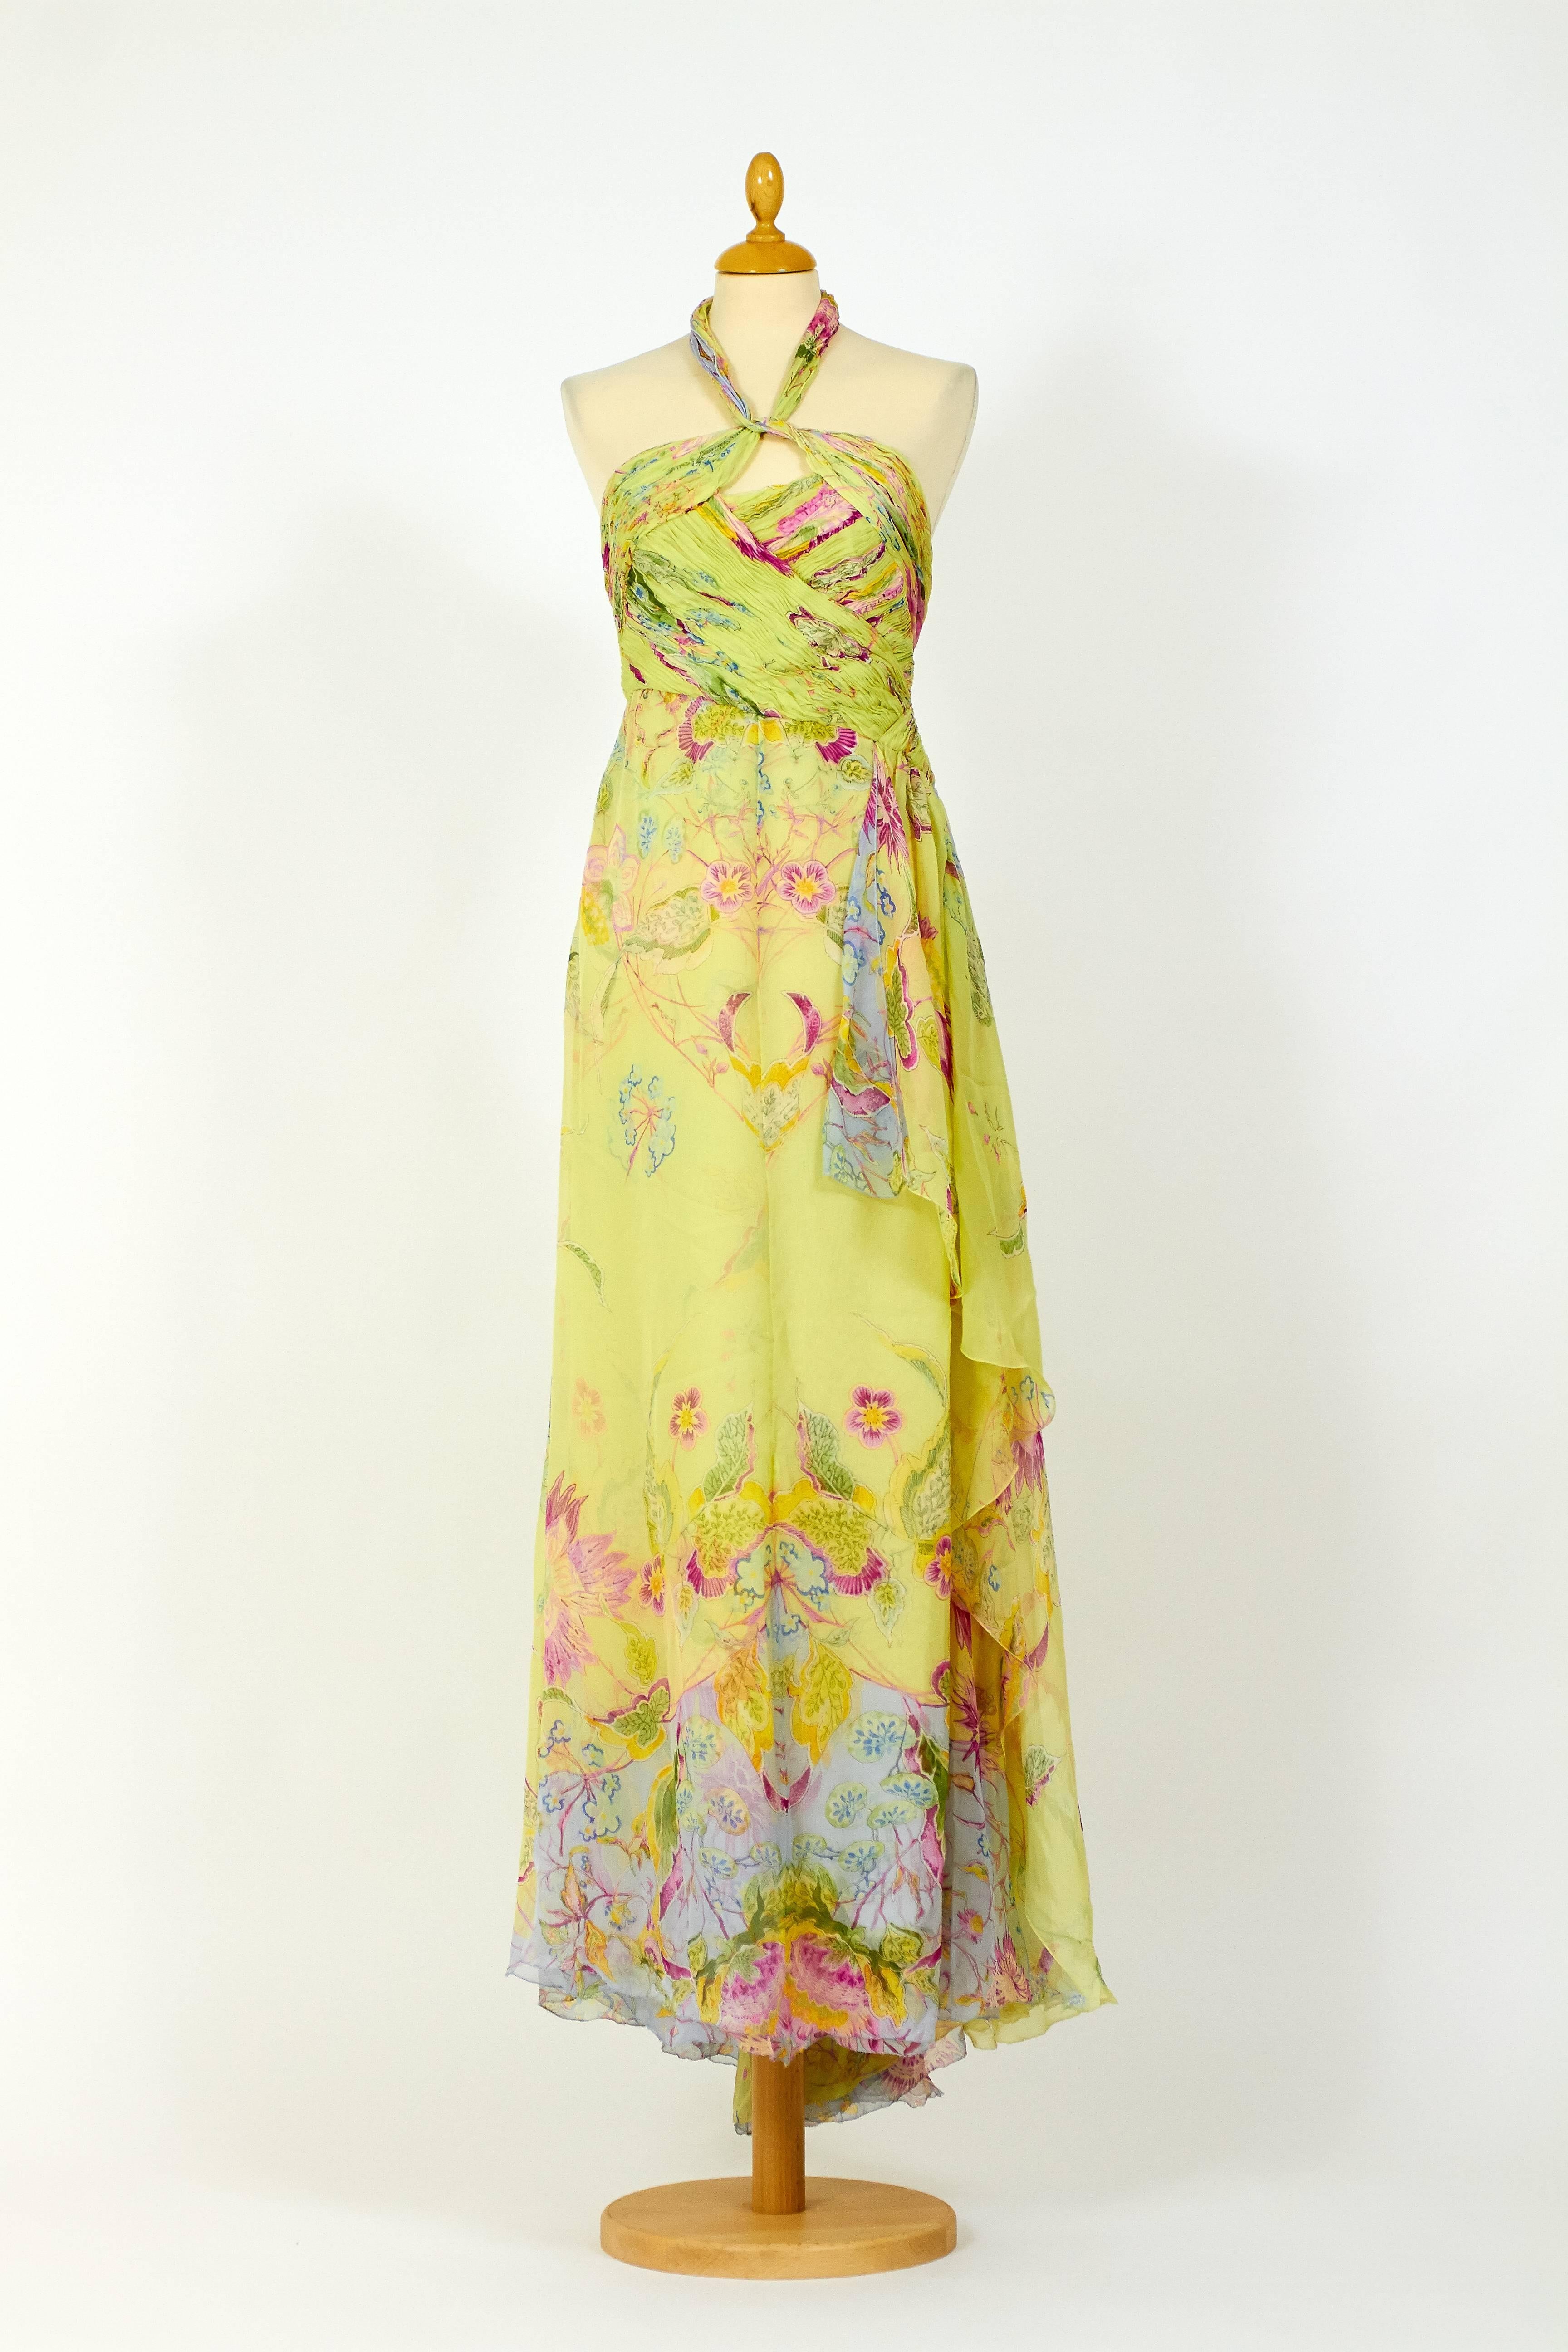 This stunning  Valentino Long dress is made of lime green organdy silk fabric with floral print. It's backless, with side zip and hook closure and has tie up straps at neck. It has asymmetric draped bodice and its fully lined. It also has a deep